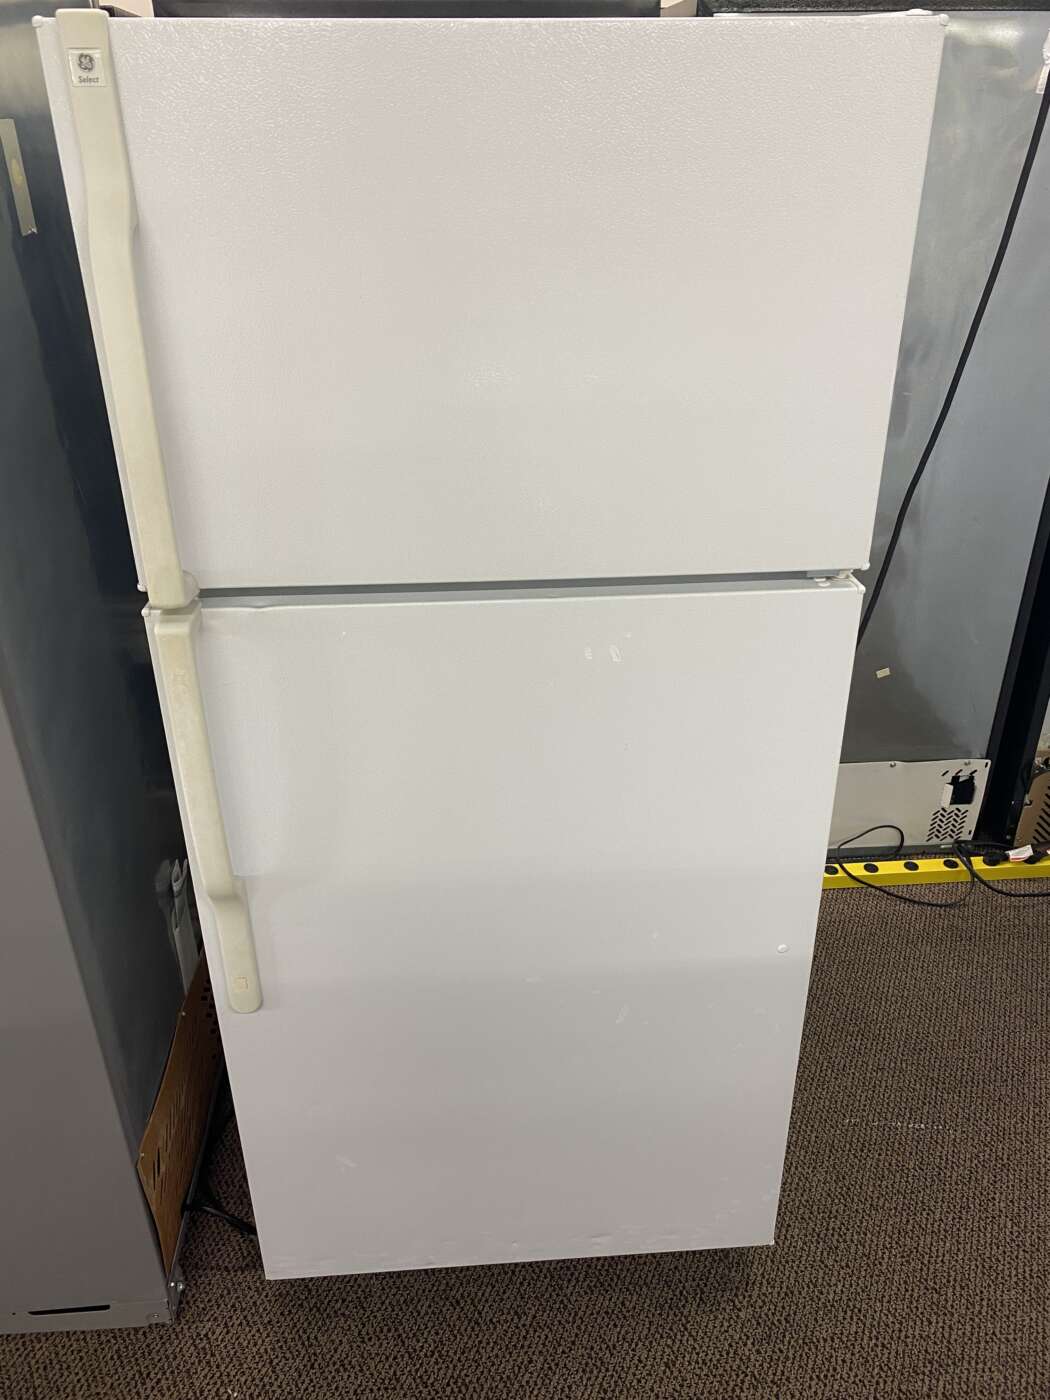 Reconditioned 15.7 Cu. Ft. Top-Mount Refrigerator